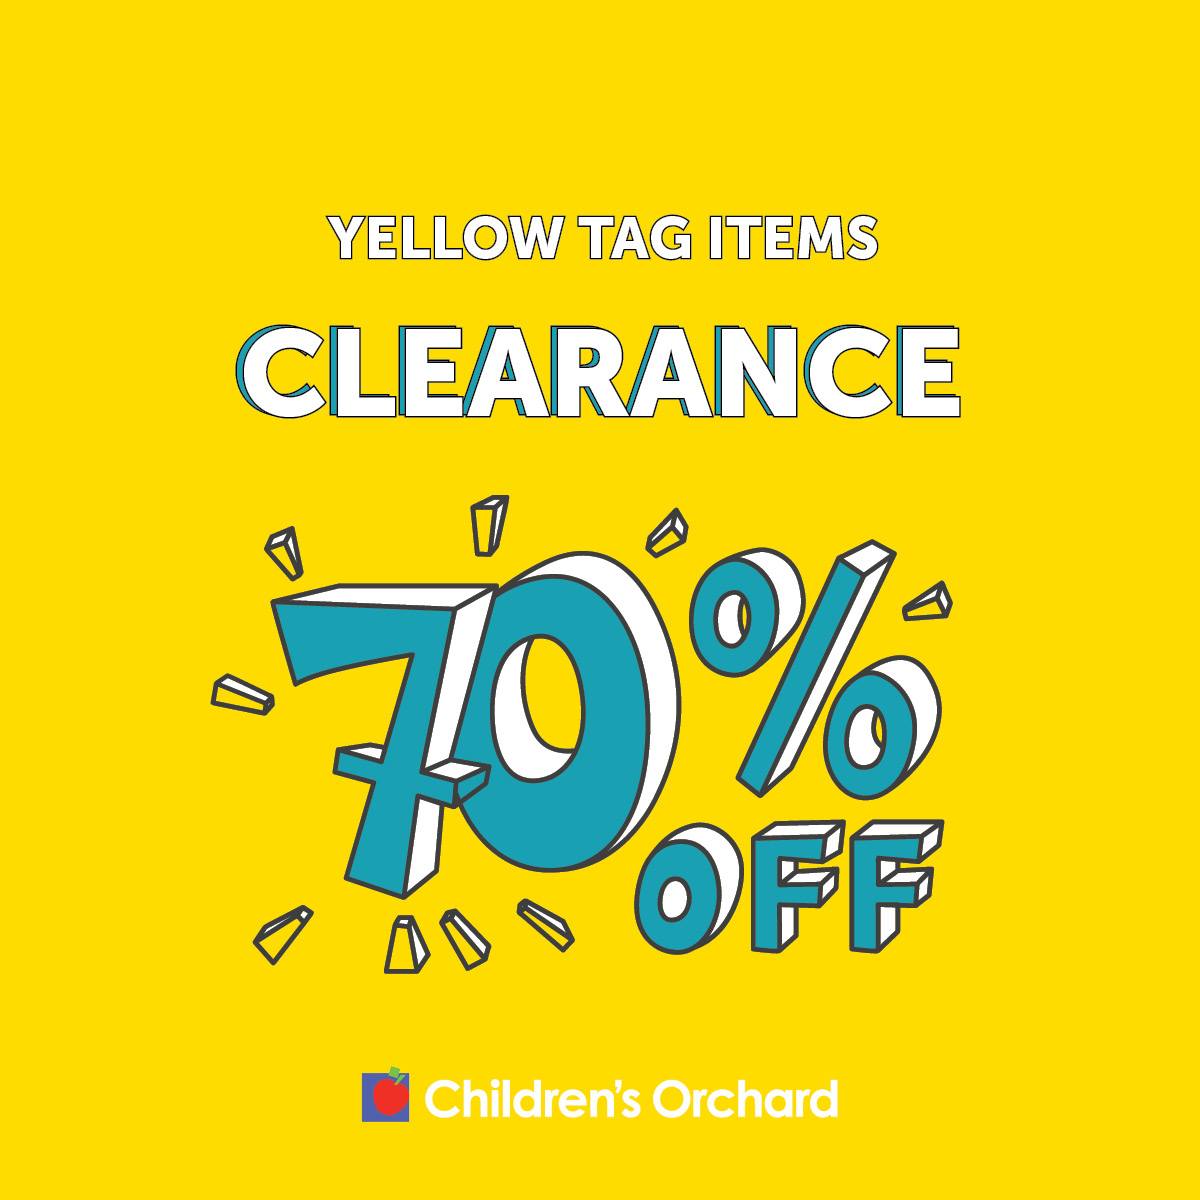 Clearance: 70% off yellow tag items.